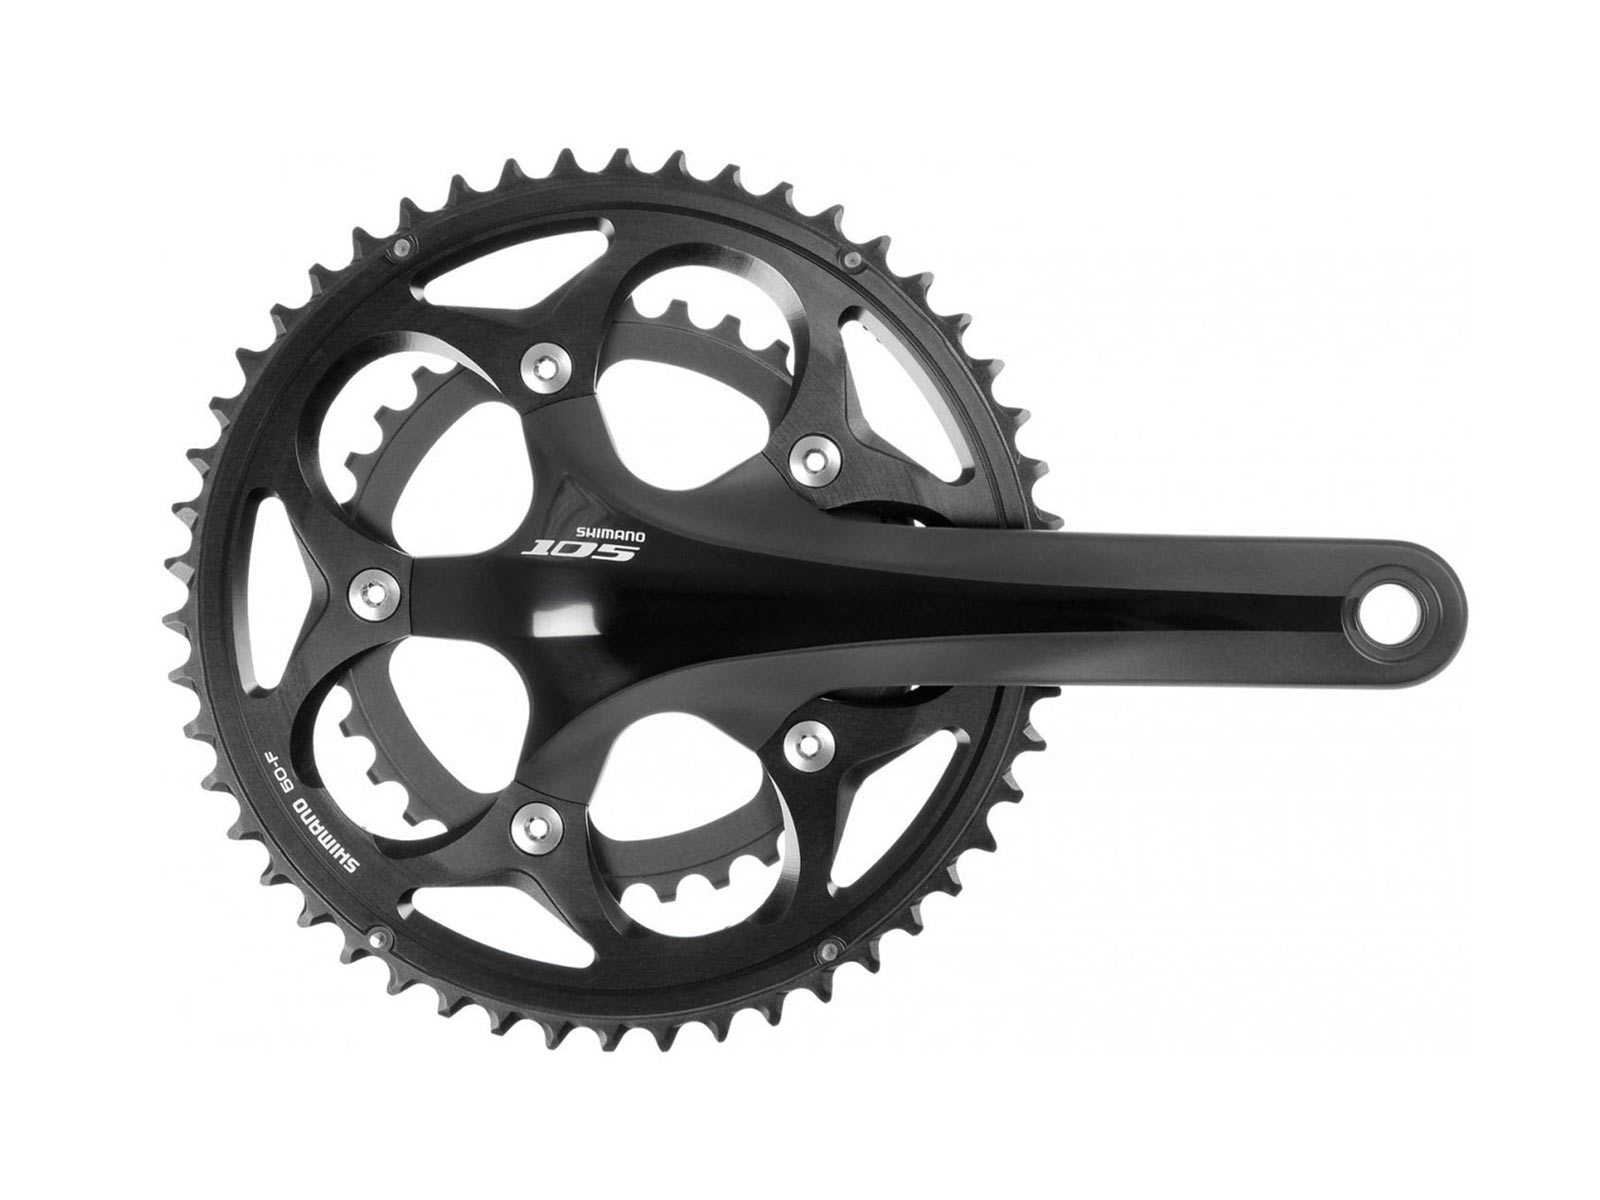 175mm Black Shimano 105 Chainset 105 5750 10 Speed Compact 50 34 teeth